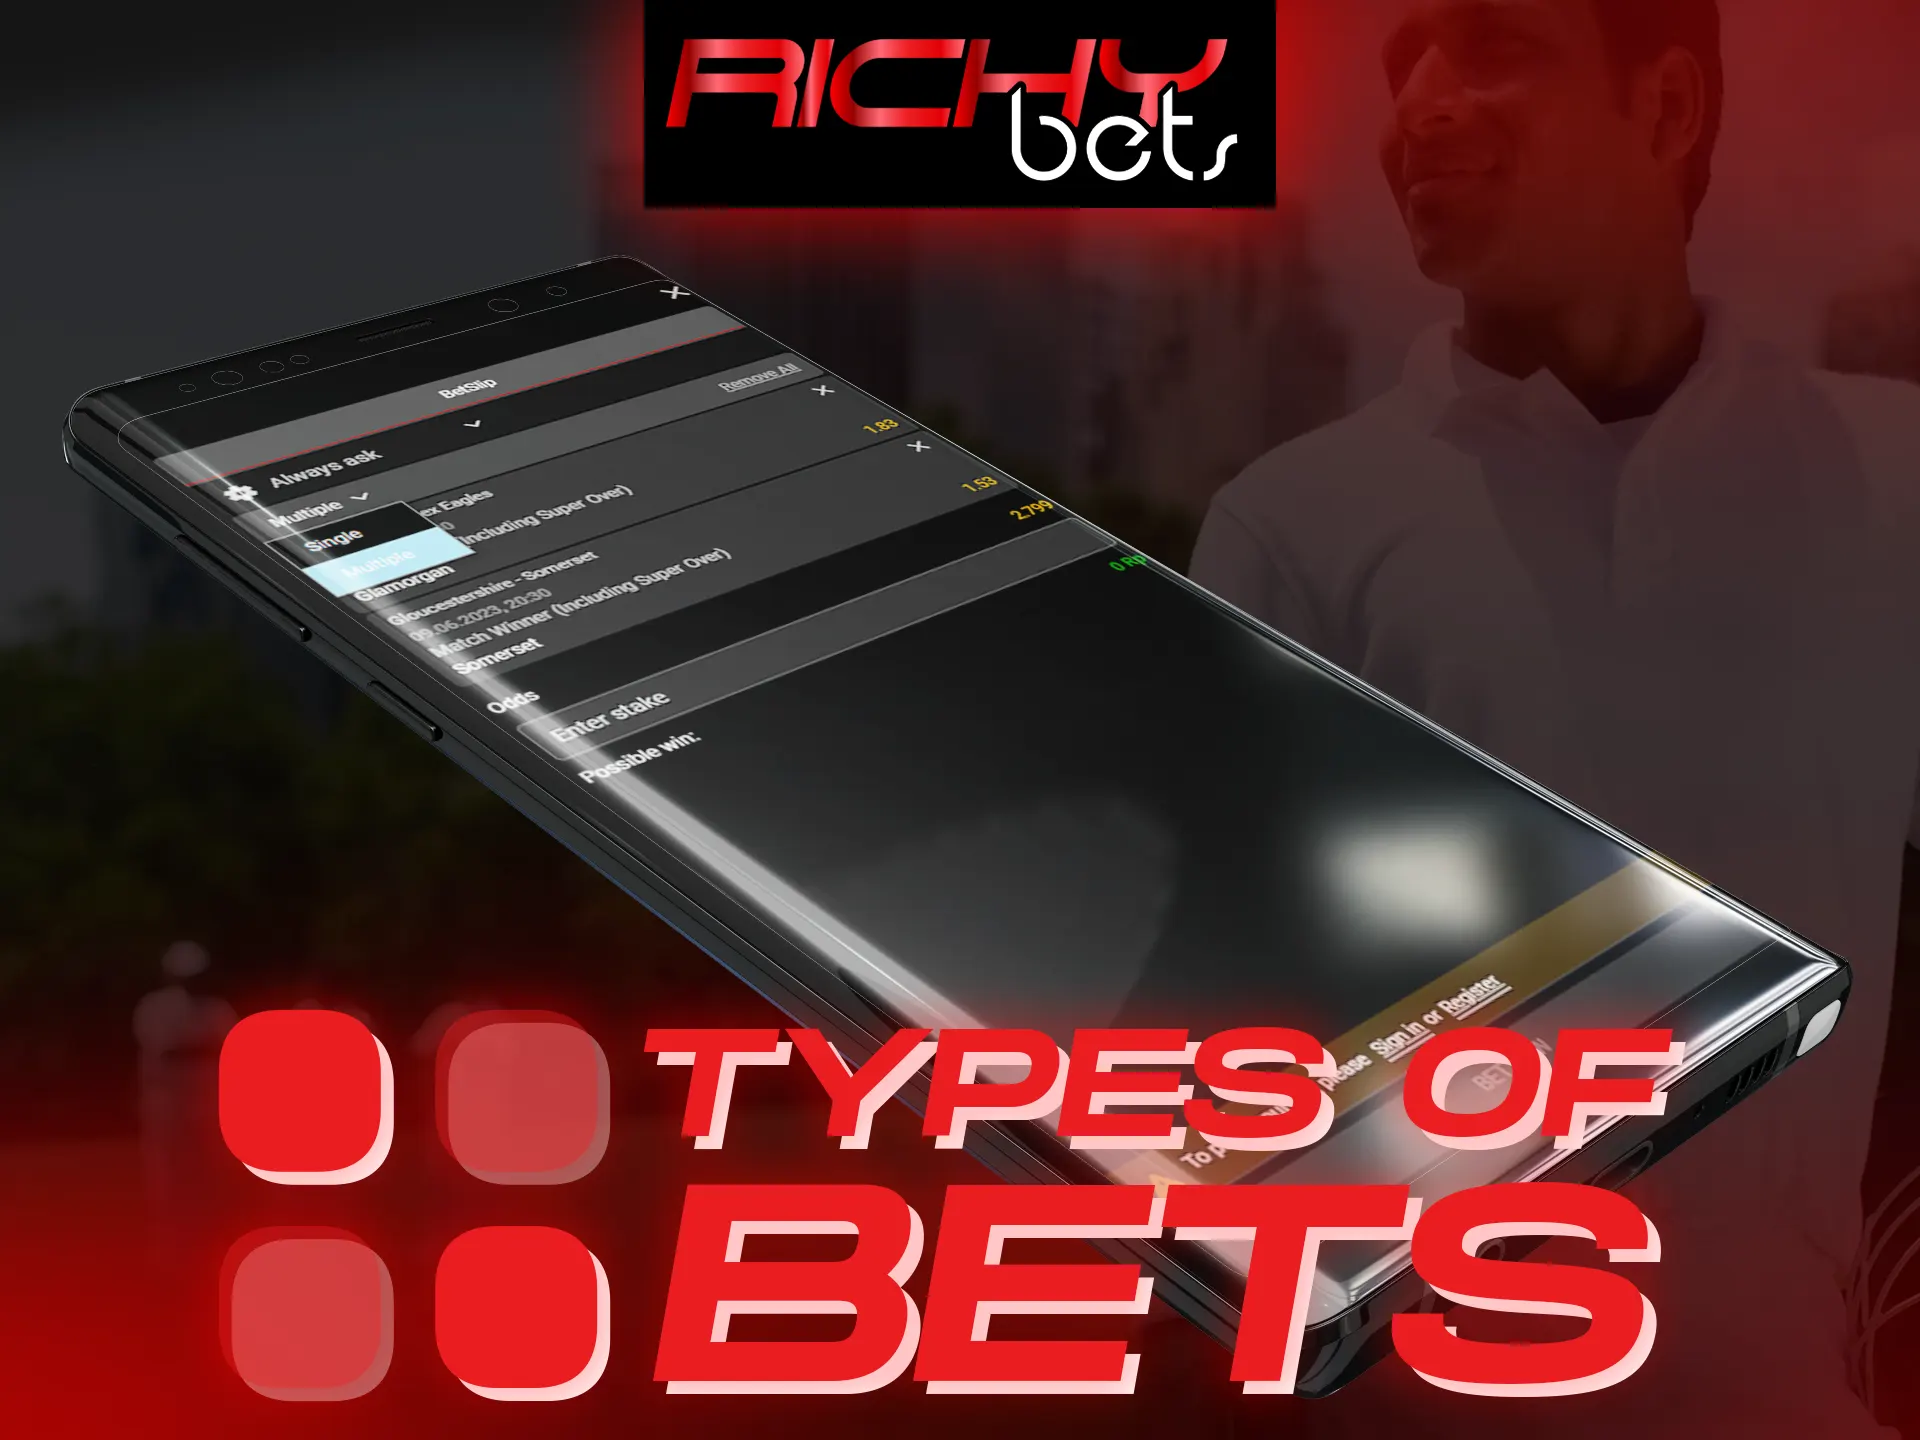 Try different types of bets when making new bets at the Richybets.